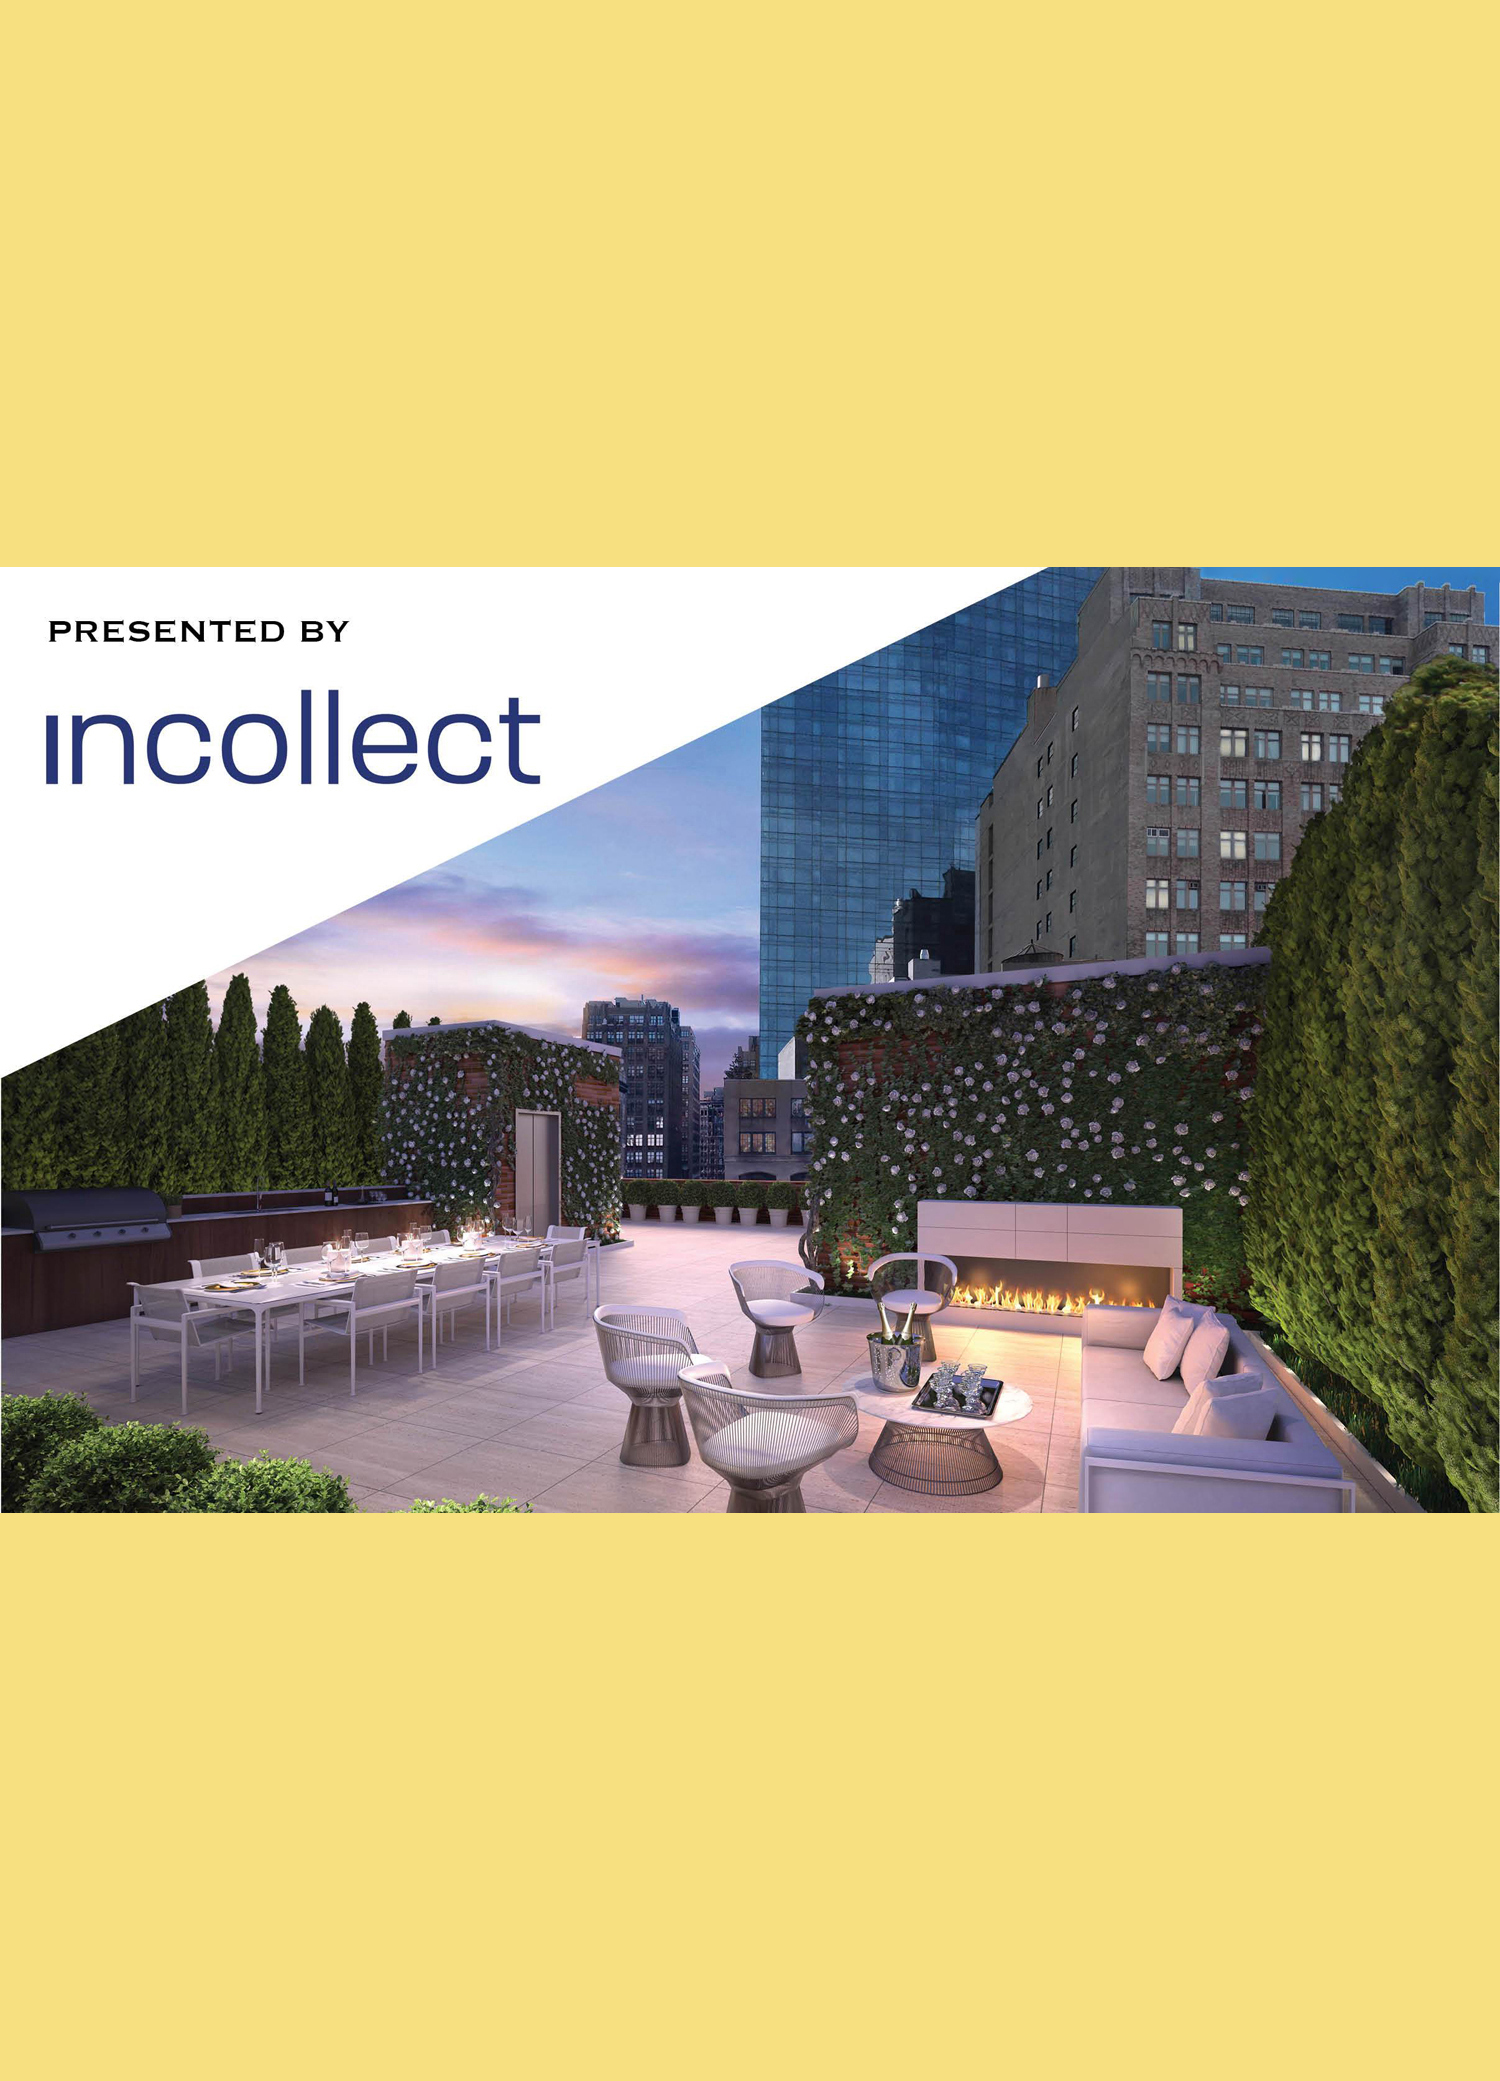 Incollect-Banner 5.jpg